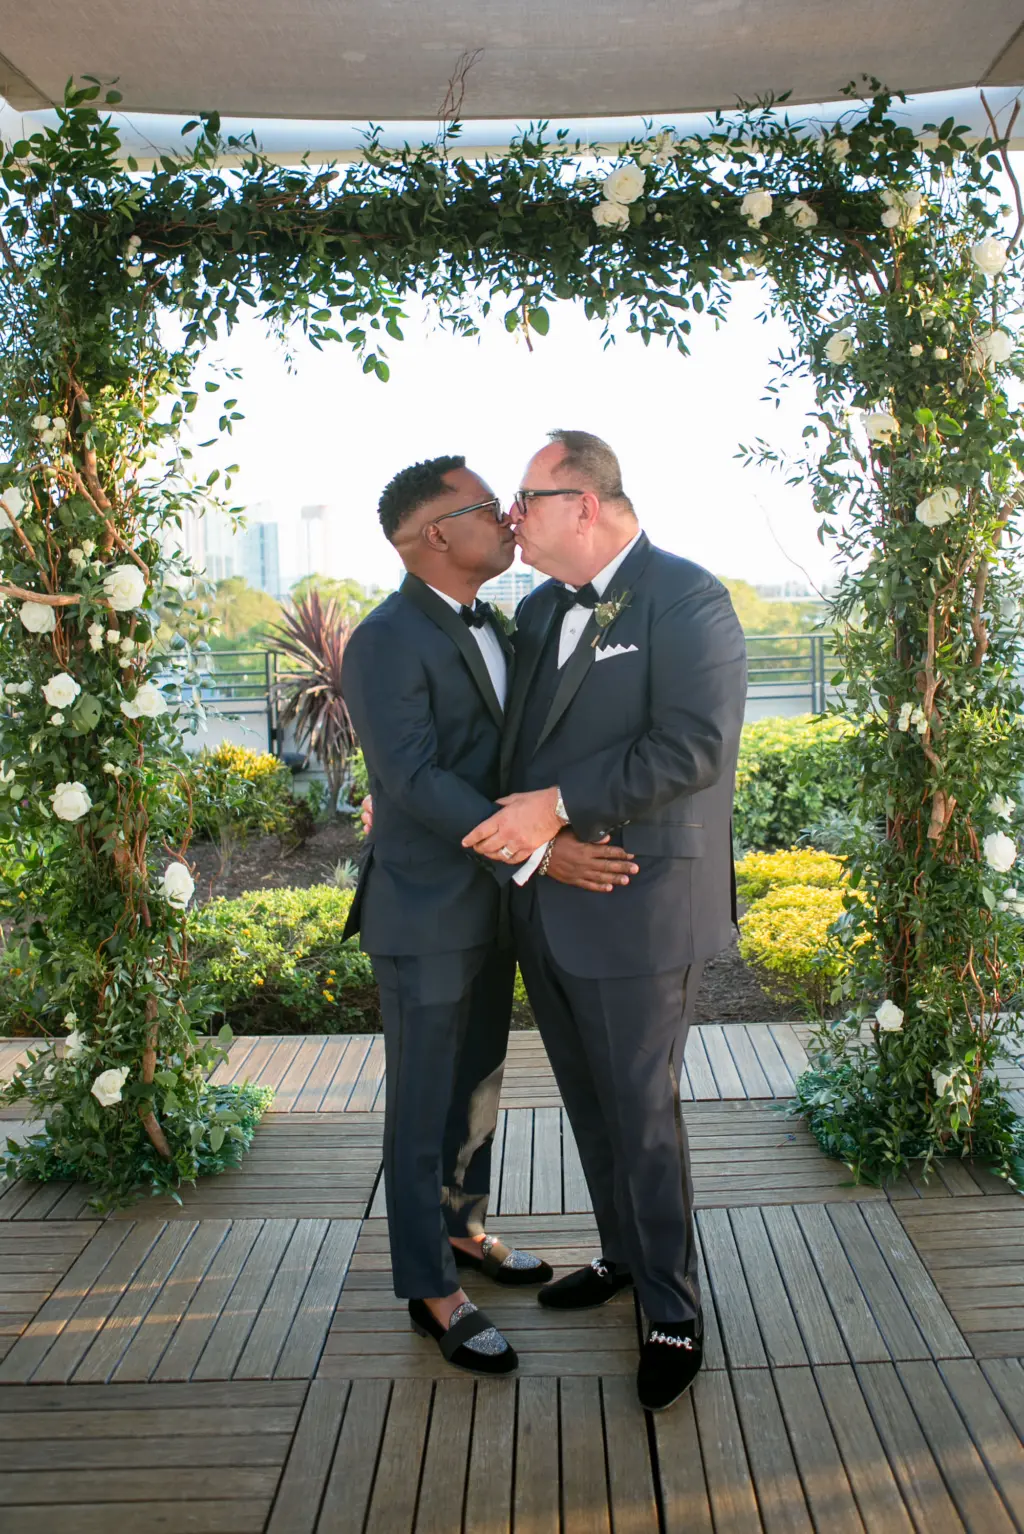 Groom and Groom First Kiss Wedding Portrait | Tampa Bay Photographer Carrie Wildes Photography